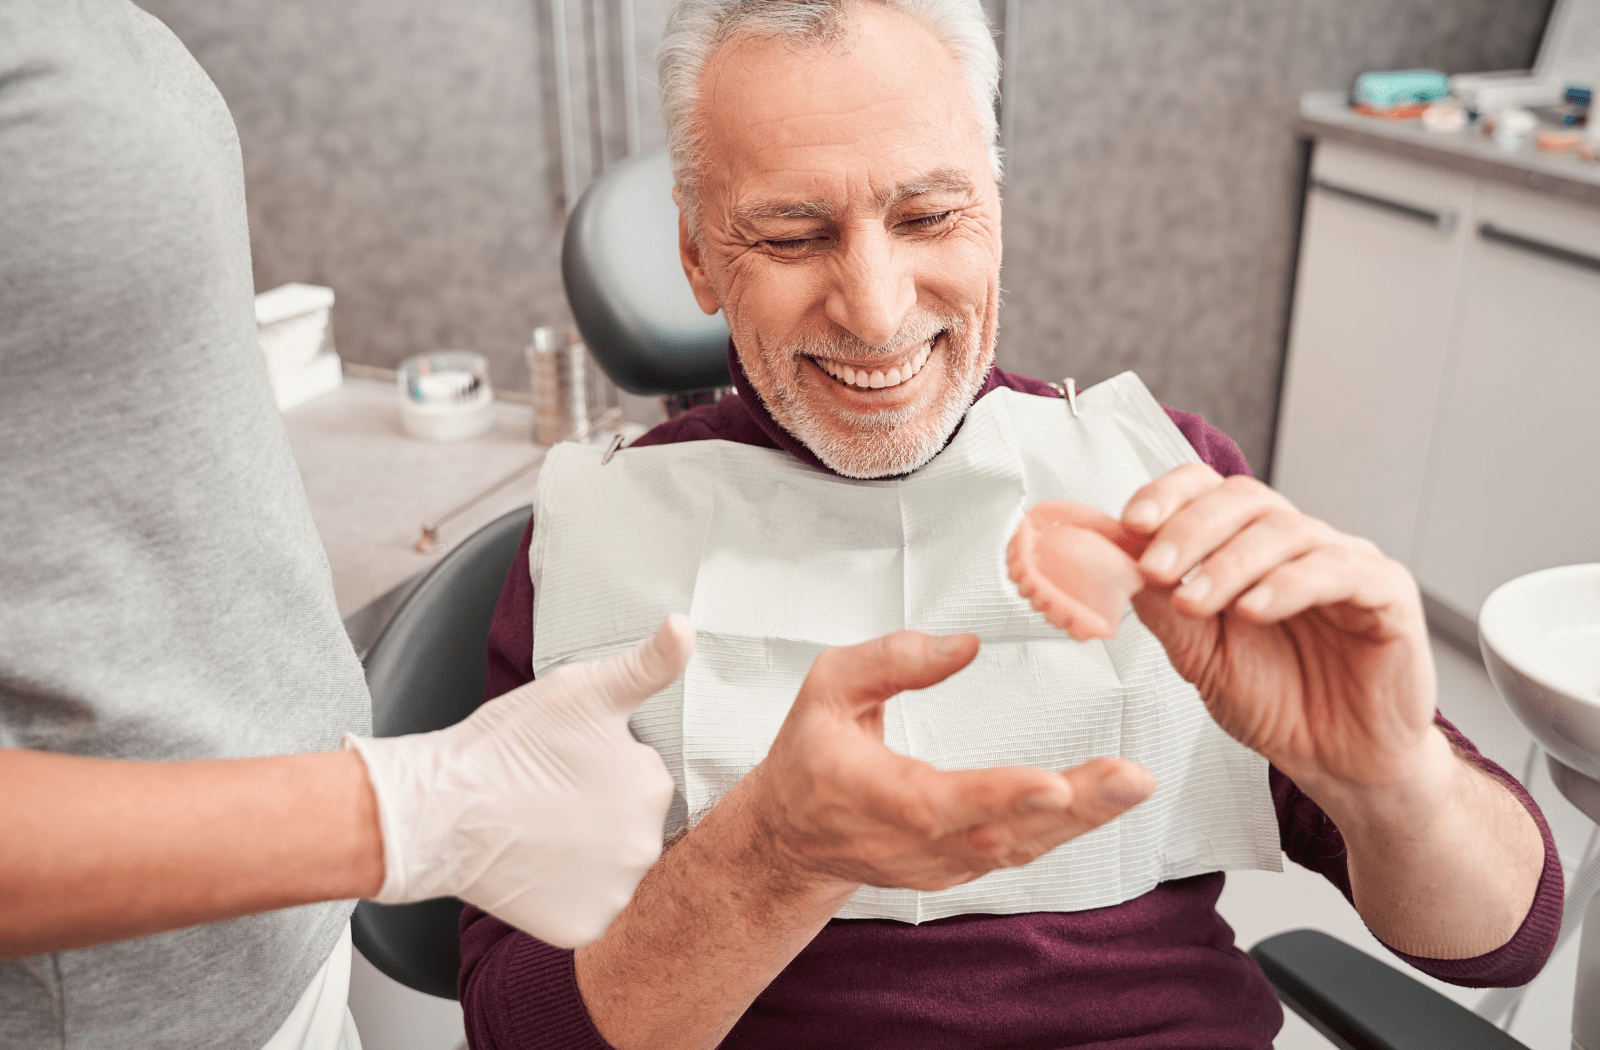 An older man at the dentist's office with a new top denture in his hand, and the dentist is giving a thumbs-up